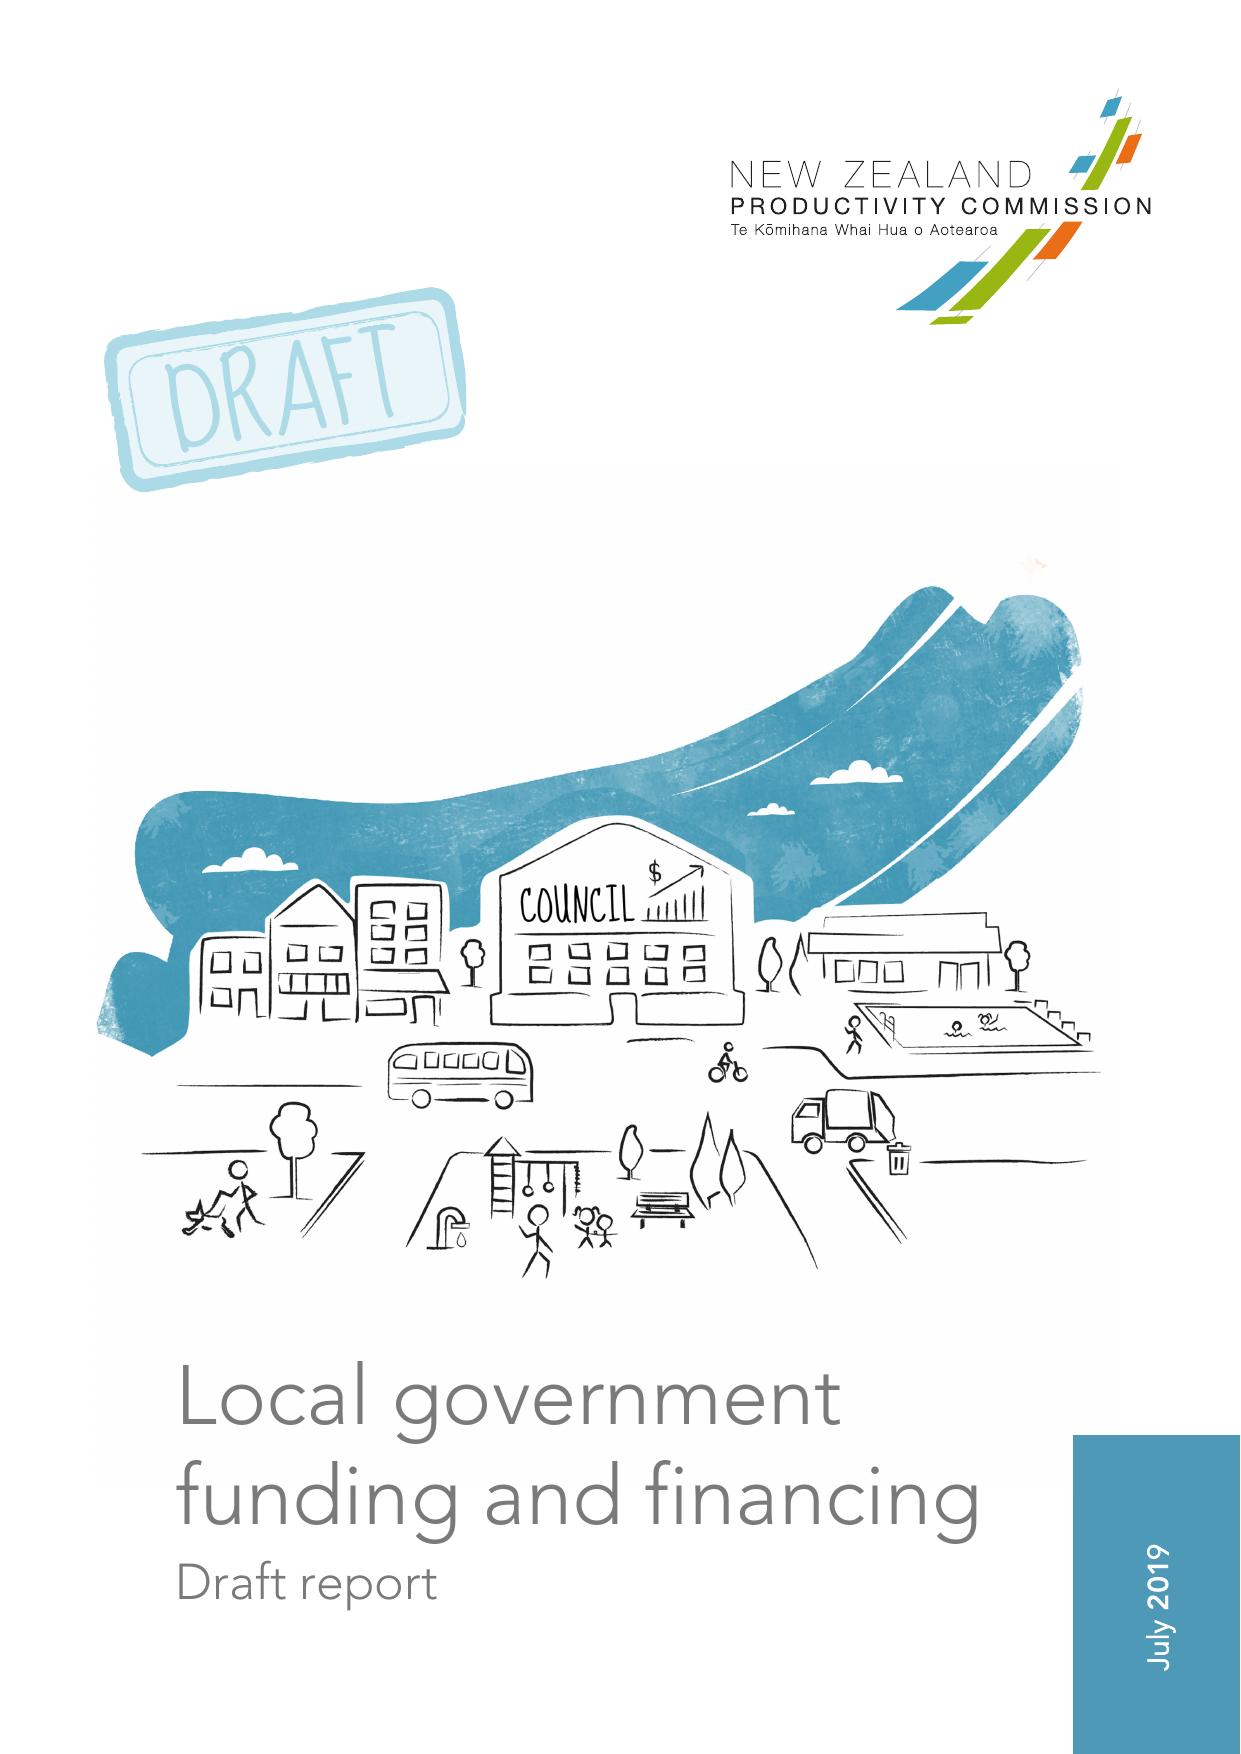 ProdCom Draft report Local government funding and financing, 2019